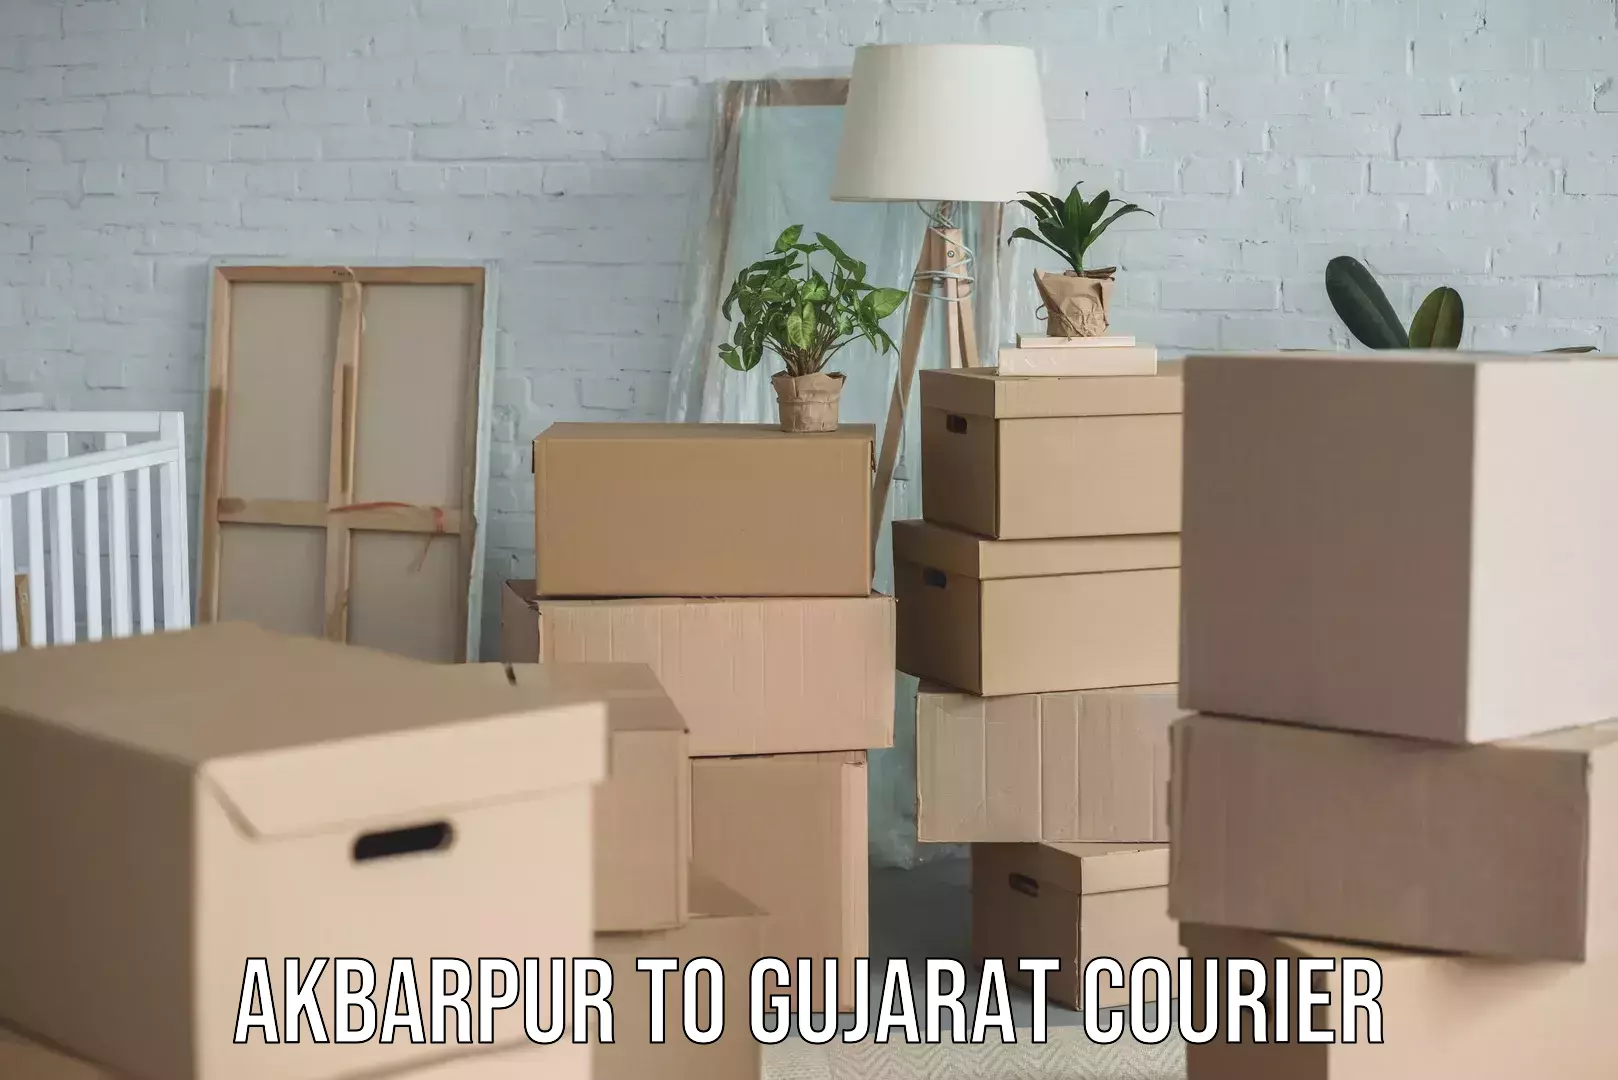 End-to-end delivery Akbarpur to Gujarat